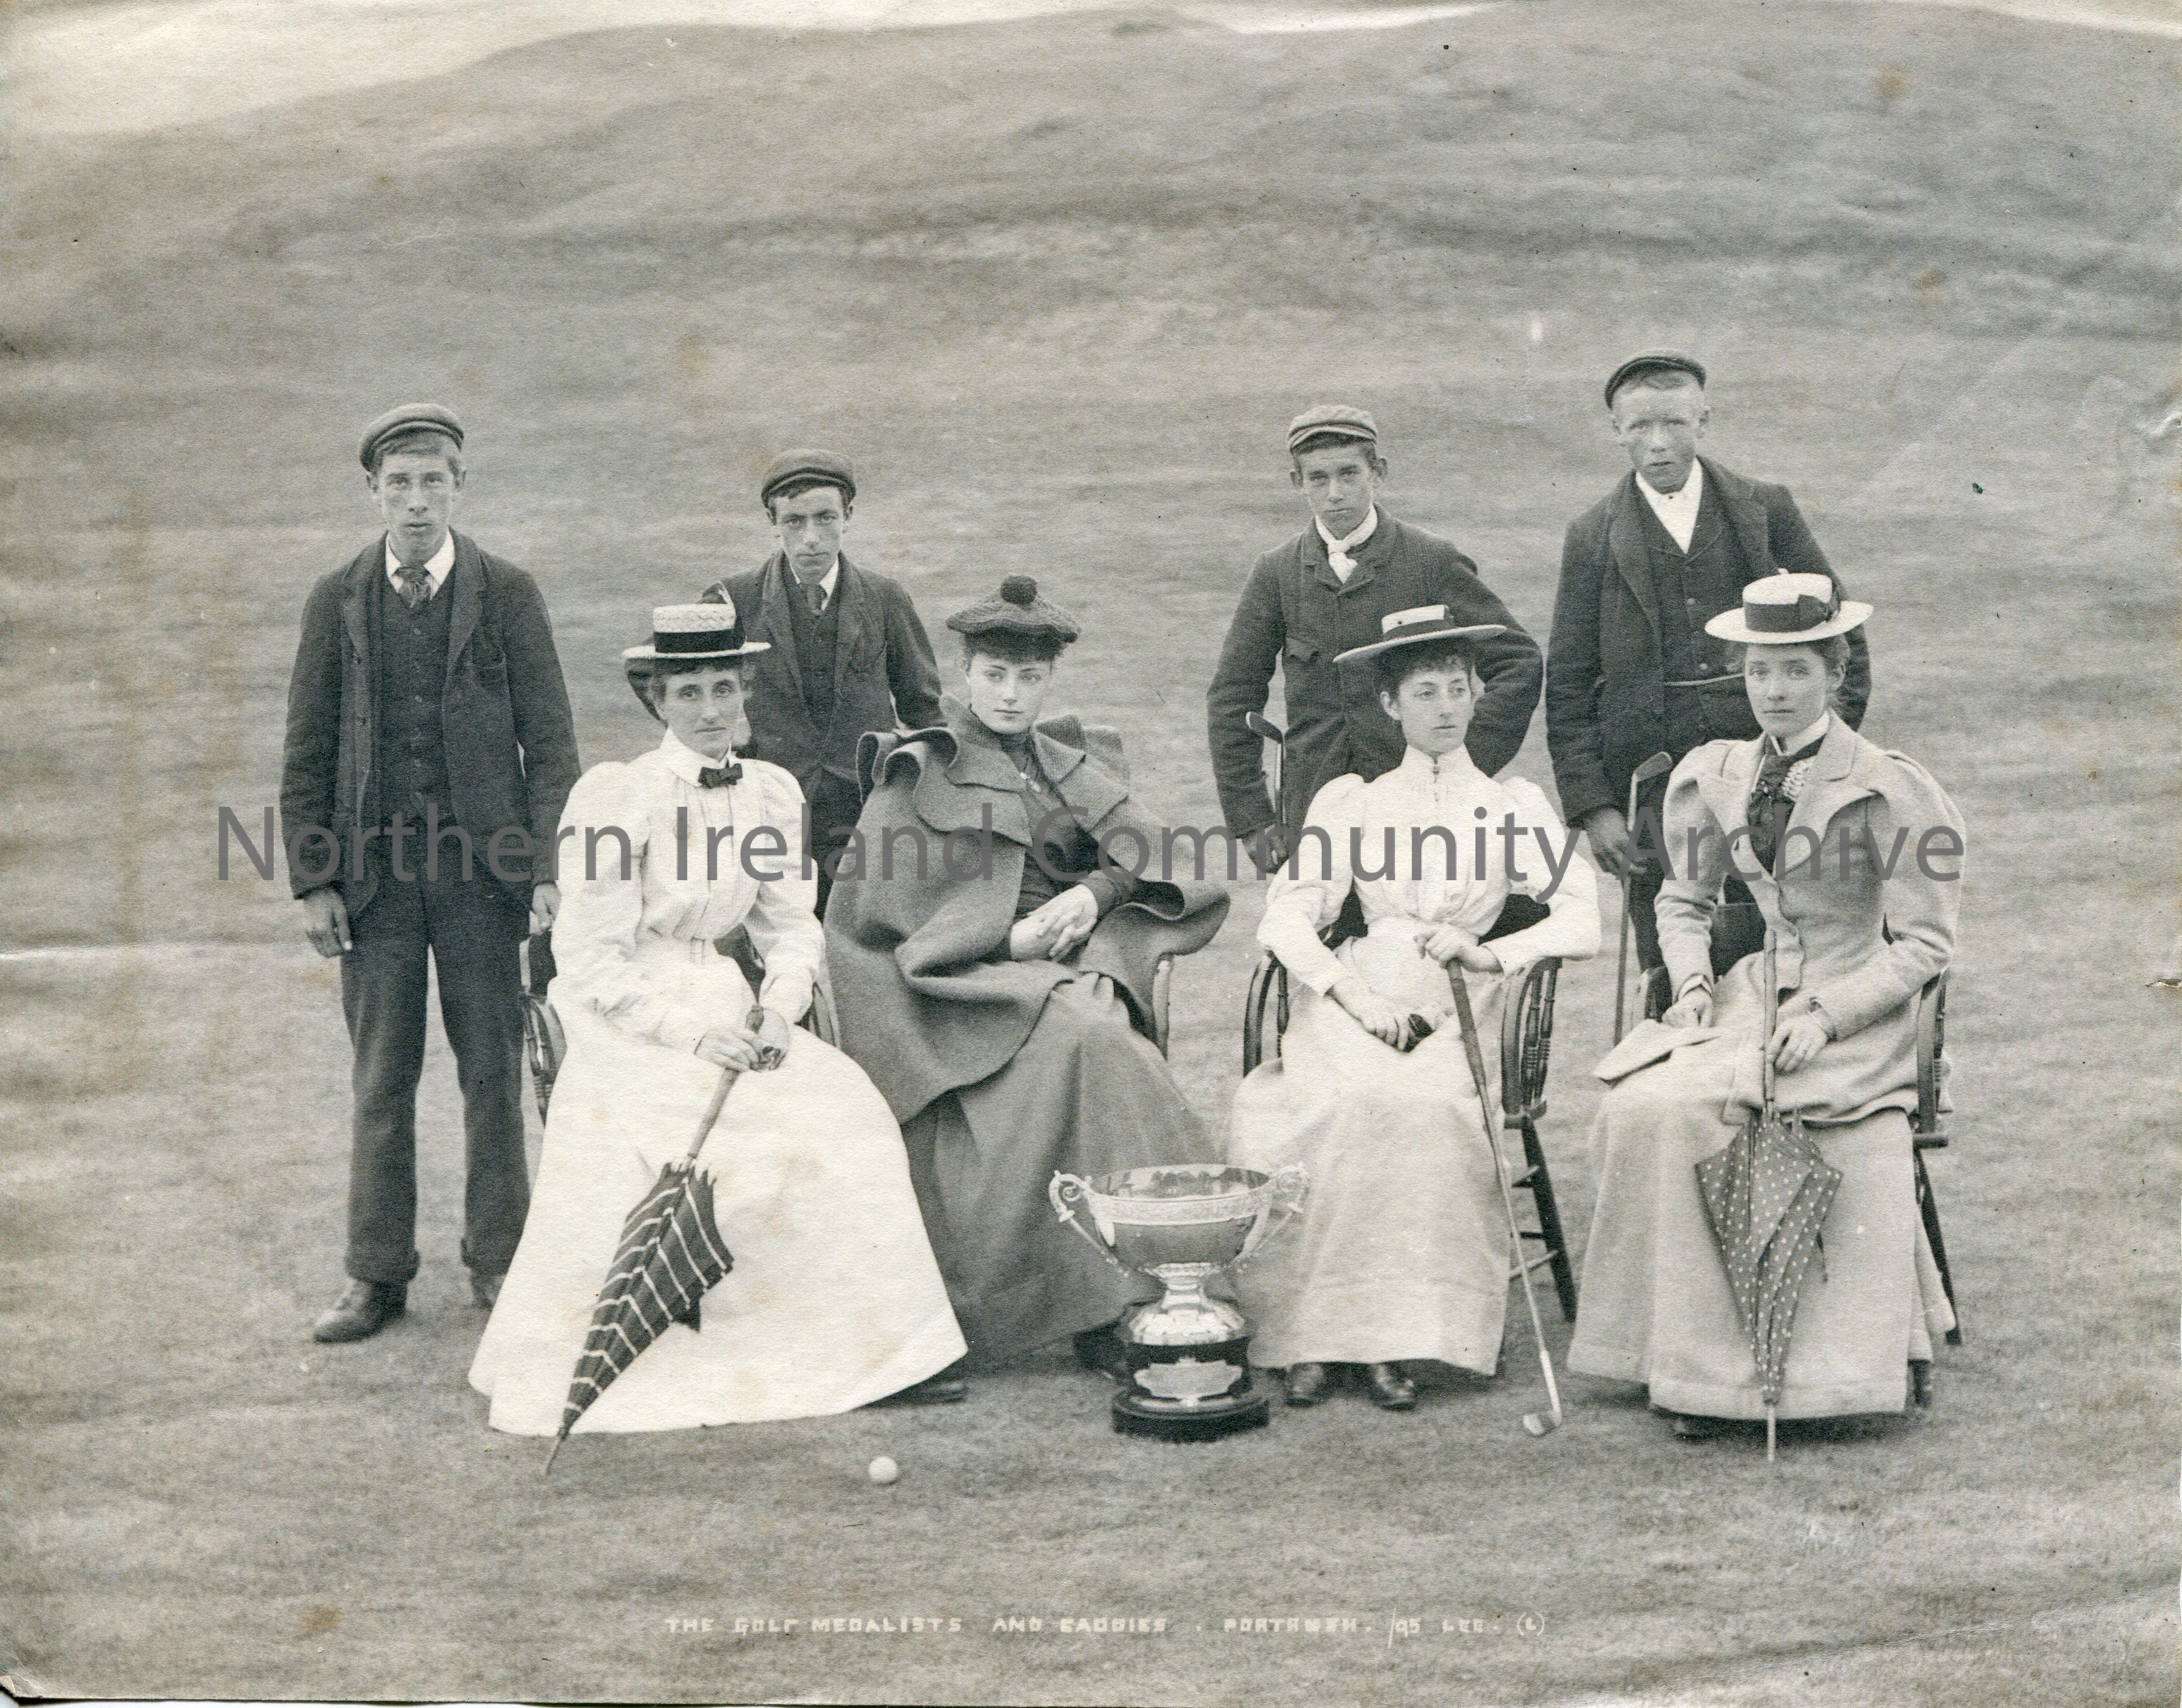 Black and white photograph of 4 women golfers sitting on chairs on a golf course in all their finery in front of their caddies who are in white collar…